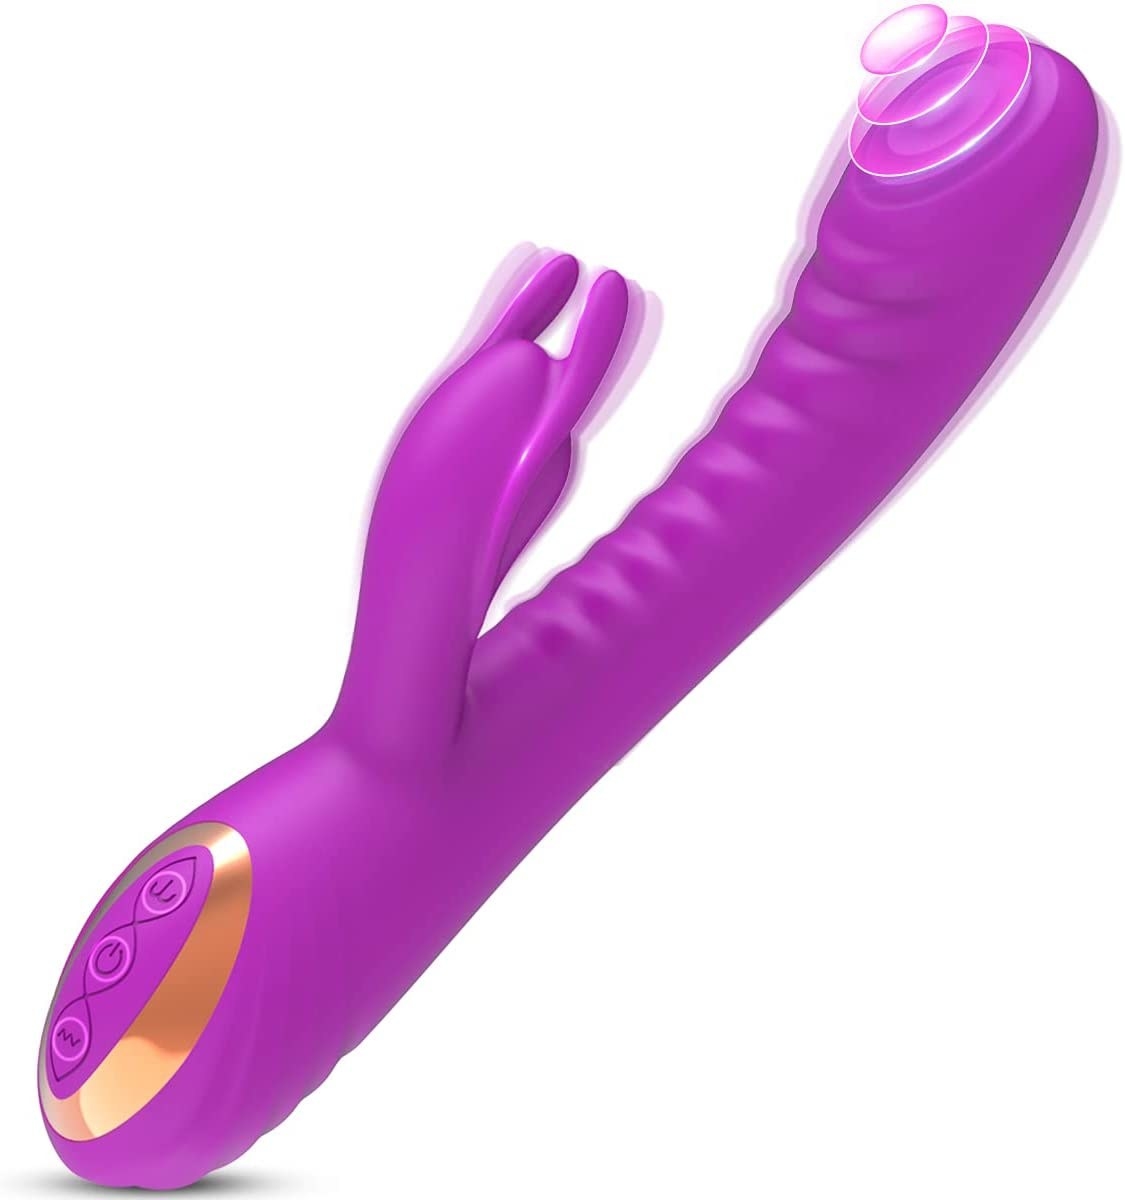 The vibrator on a white background